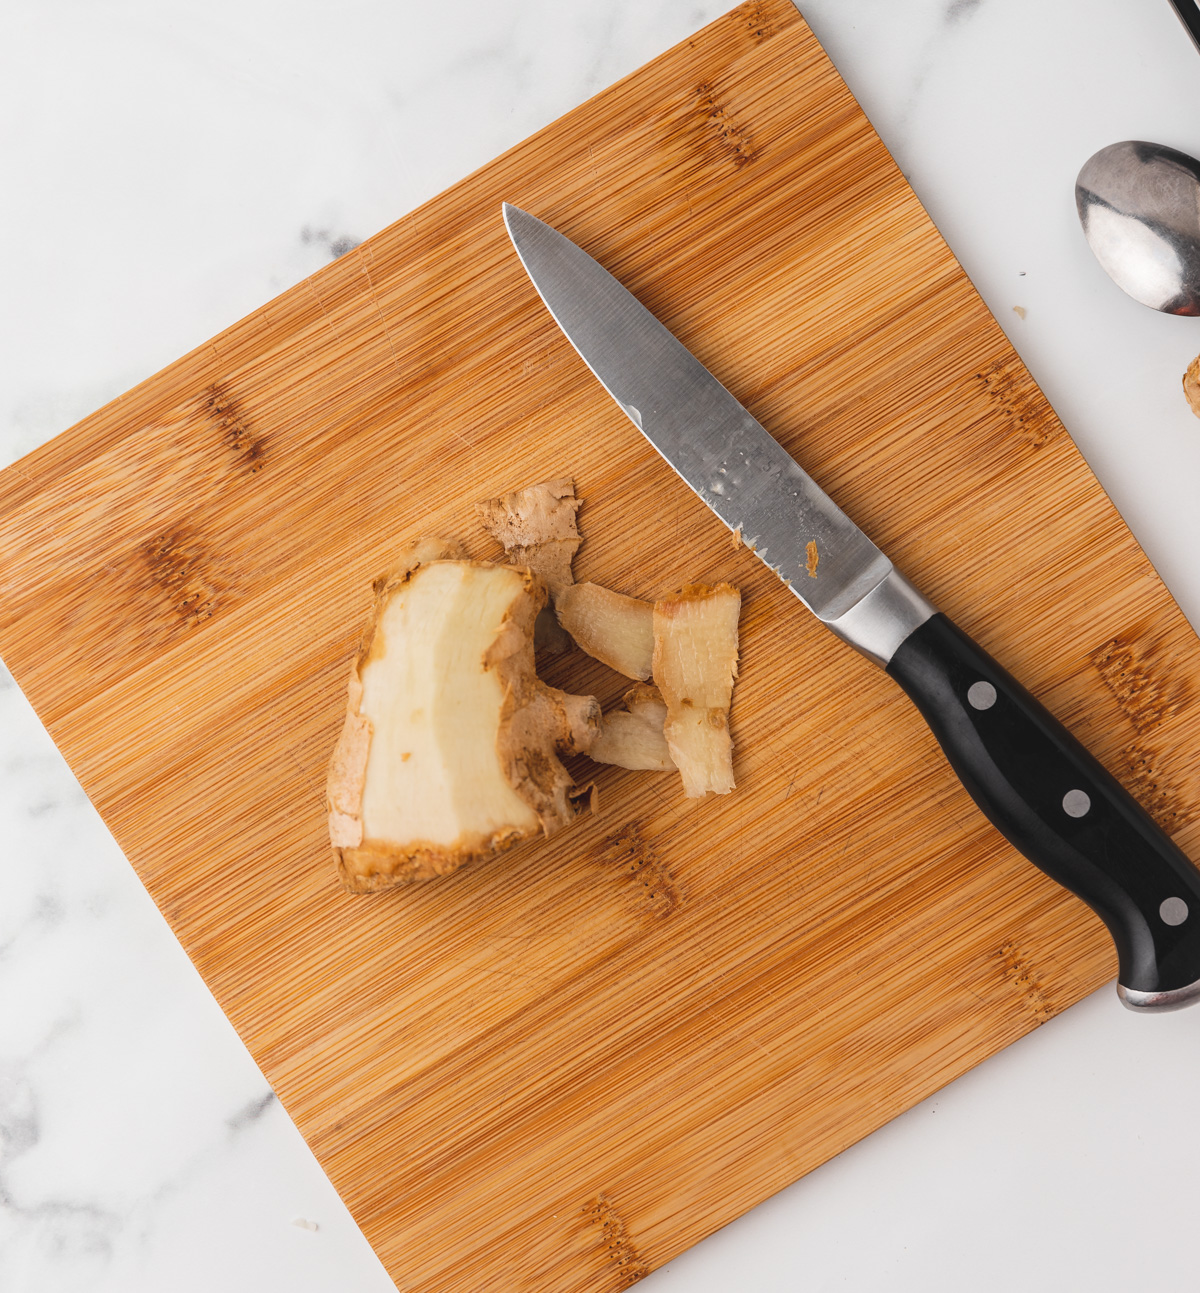 partially peeled ginger and a paring knife on a chopping board.